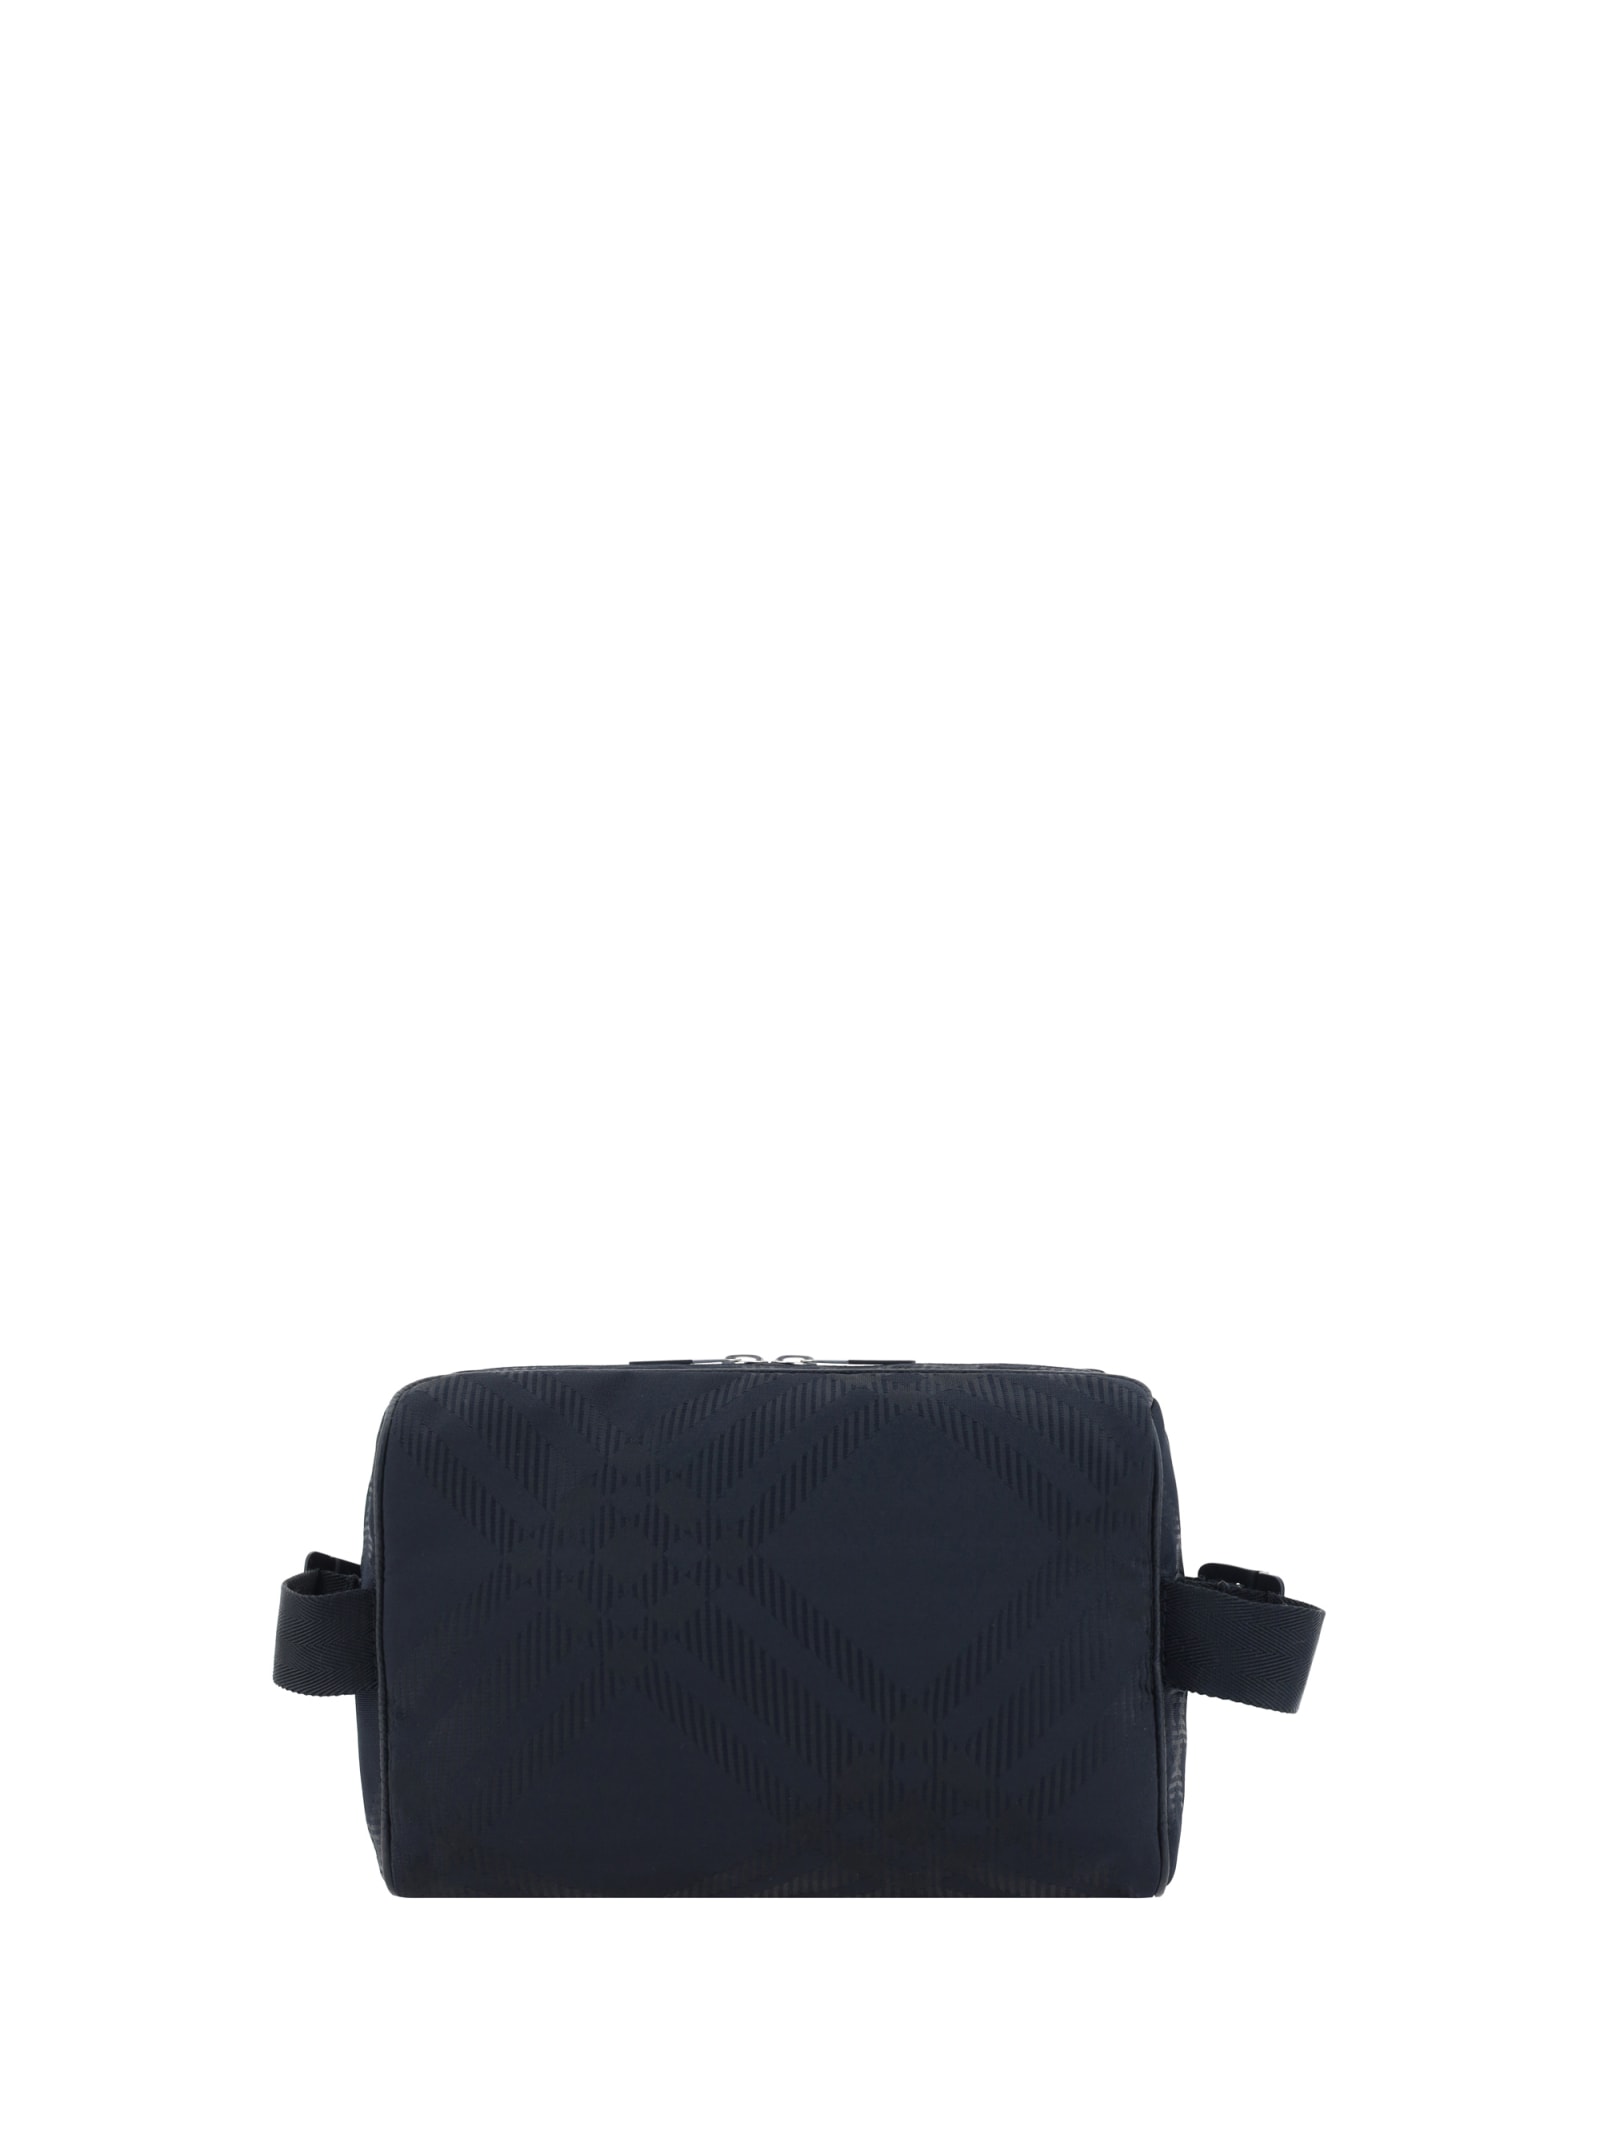 Burberry Fanny Pack In Black